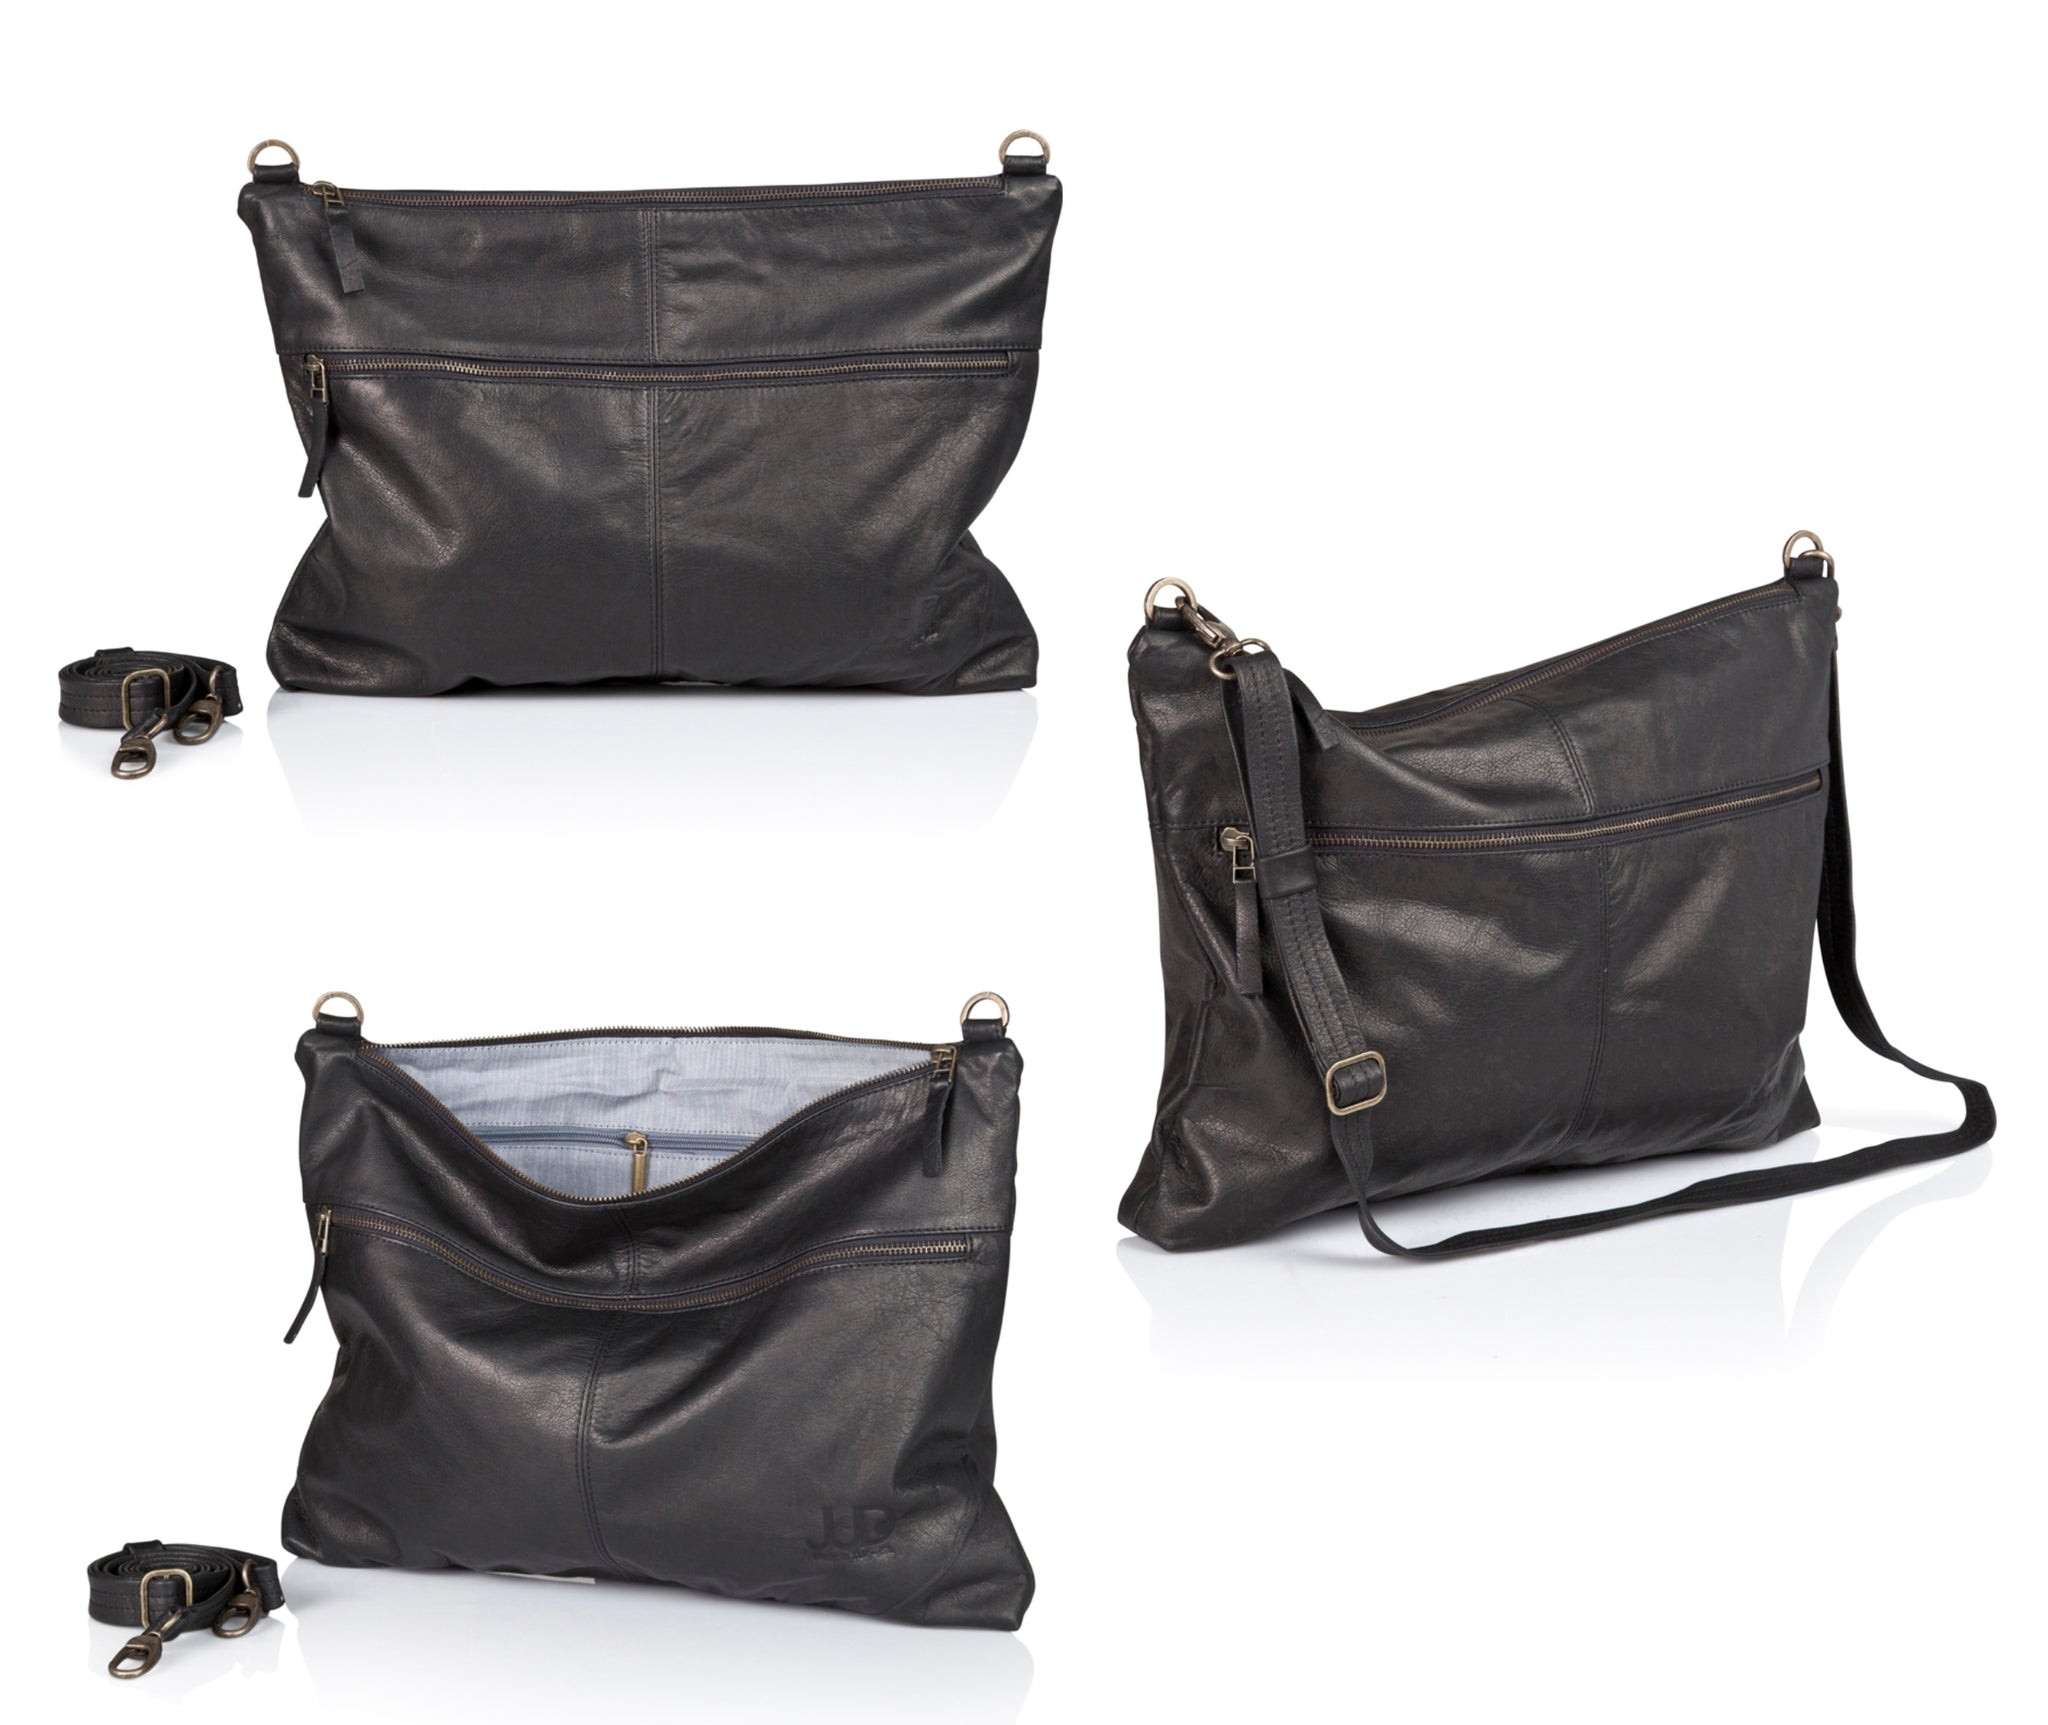 Black designer messenger bag handmade with soft Italian Napa leather suitable for laptops up to 17in with adjustable & detachable matching leather strap can be carries as a crossbody bag, shoulder bag, oversized clutch